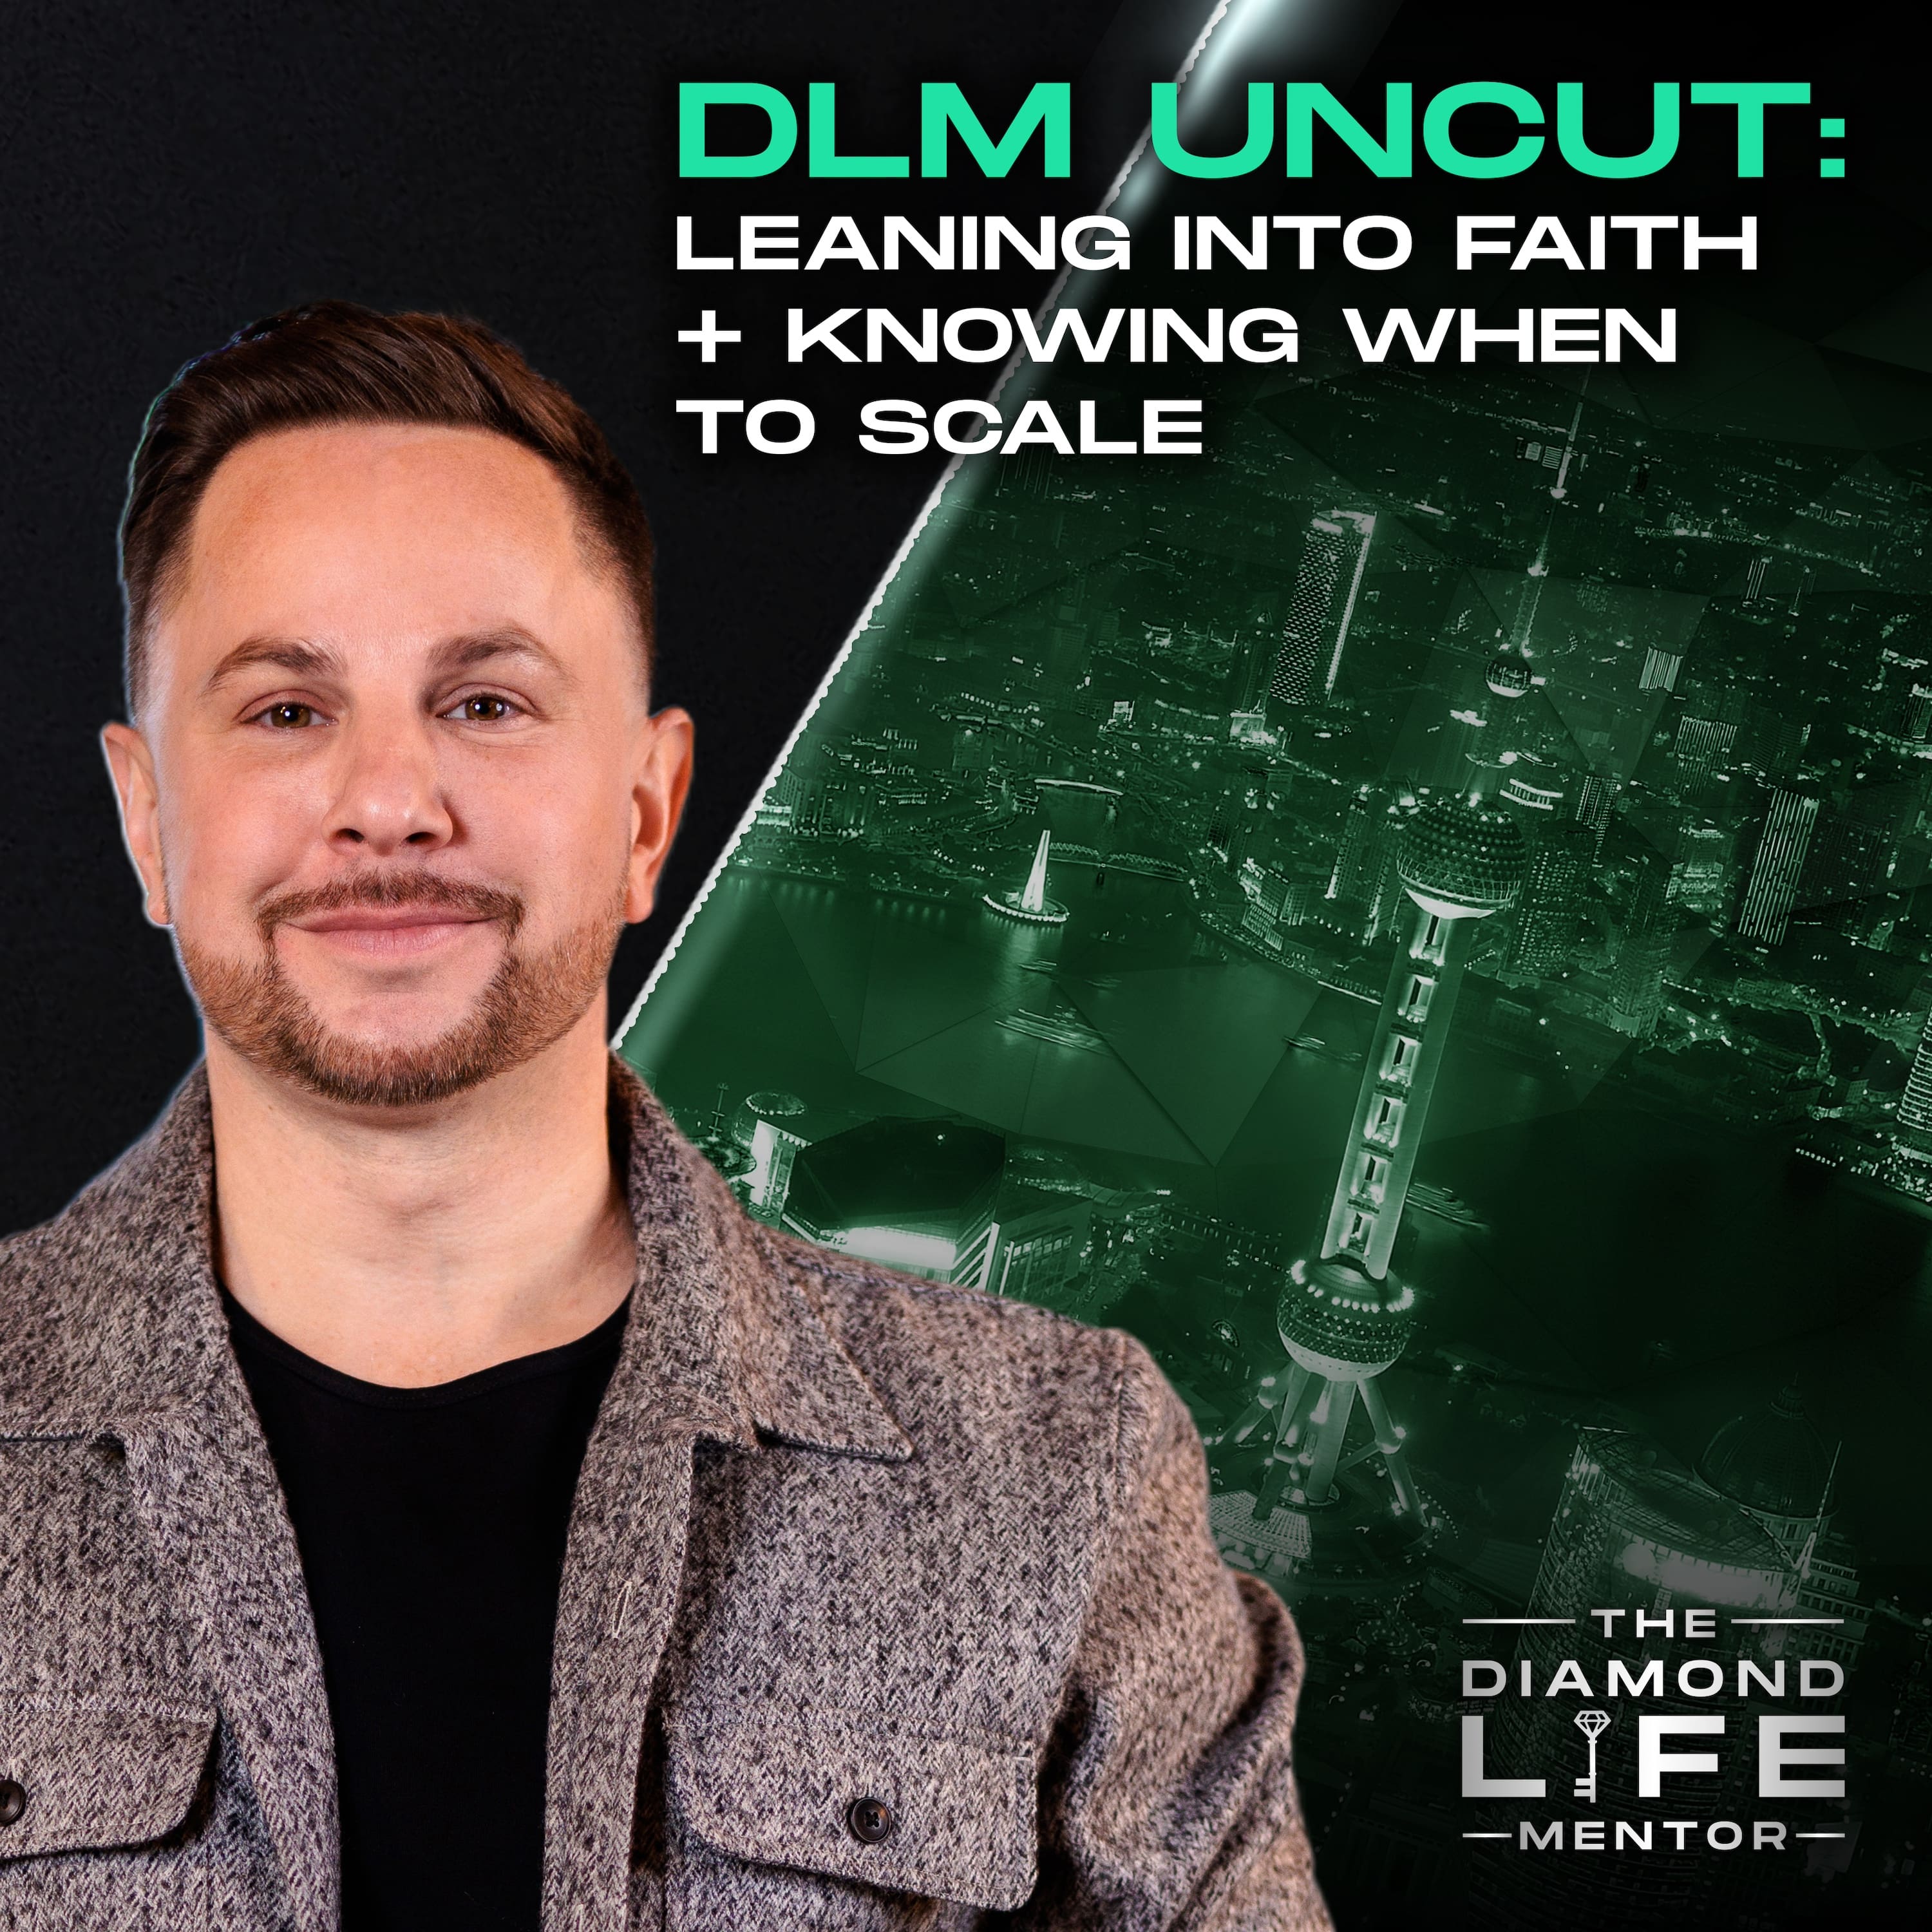 DLM Uncut: Leaning into Faith + Knowing When to Scale